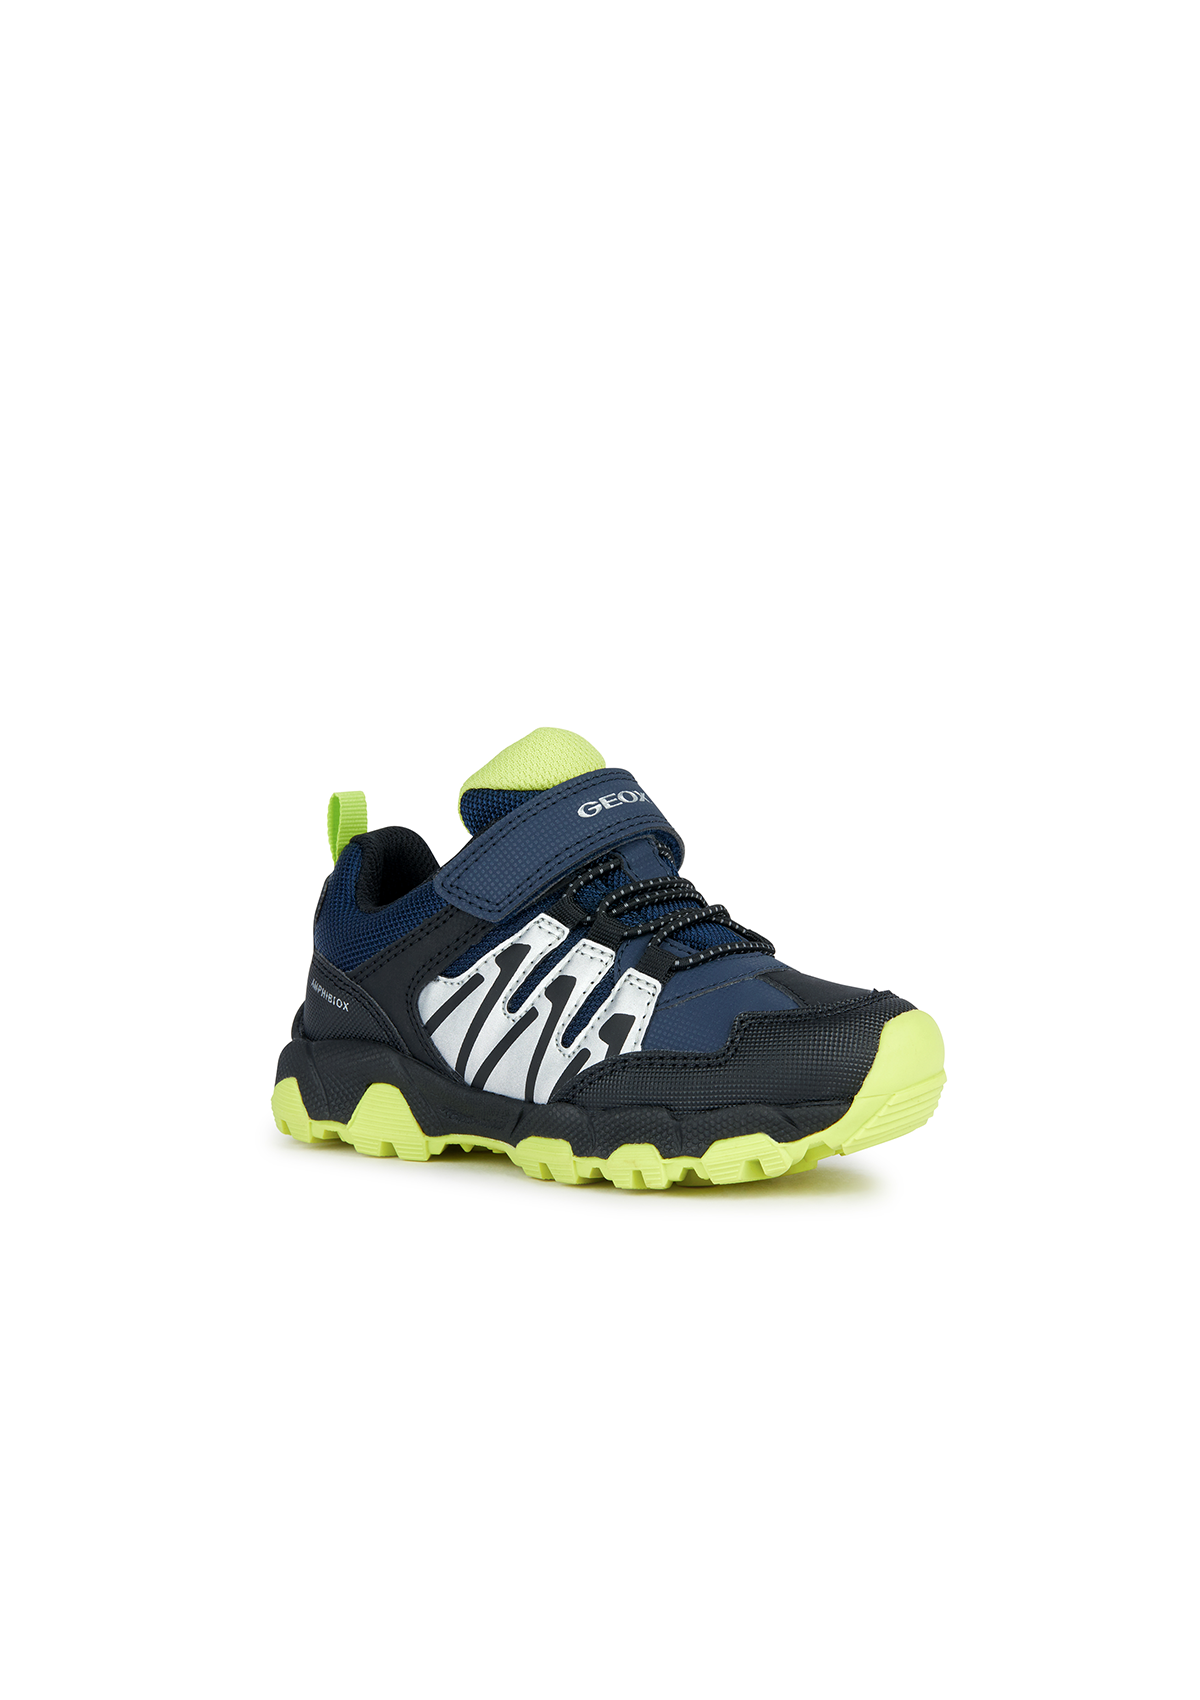 Geox Boys Trainers Magnetar Navy Lime '23